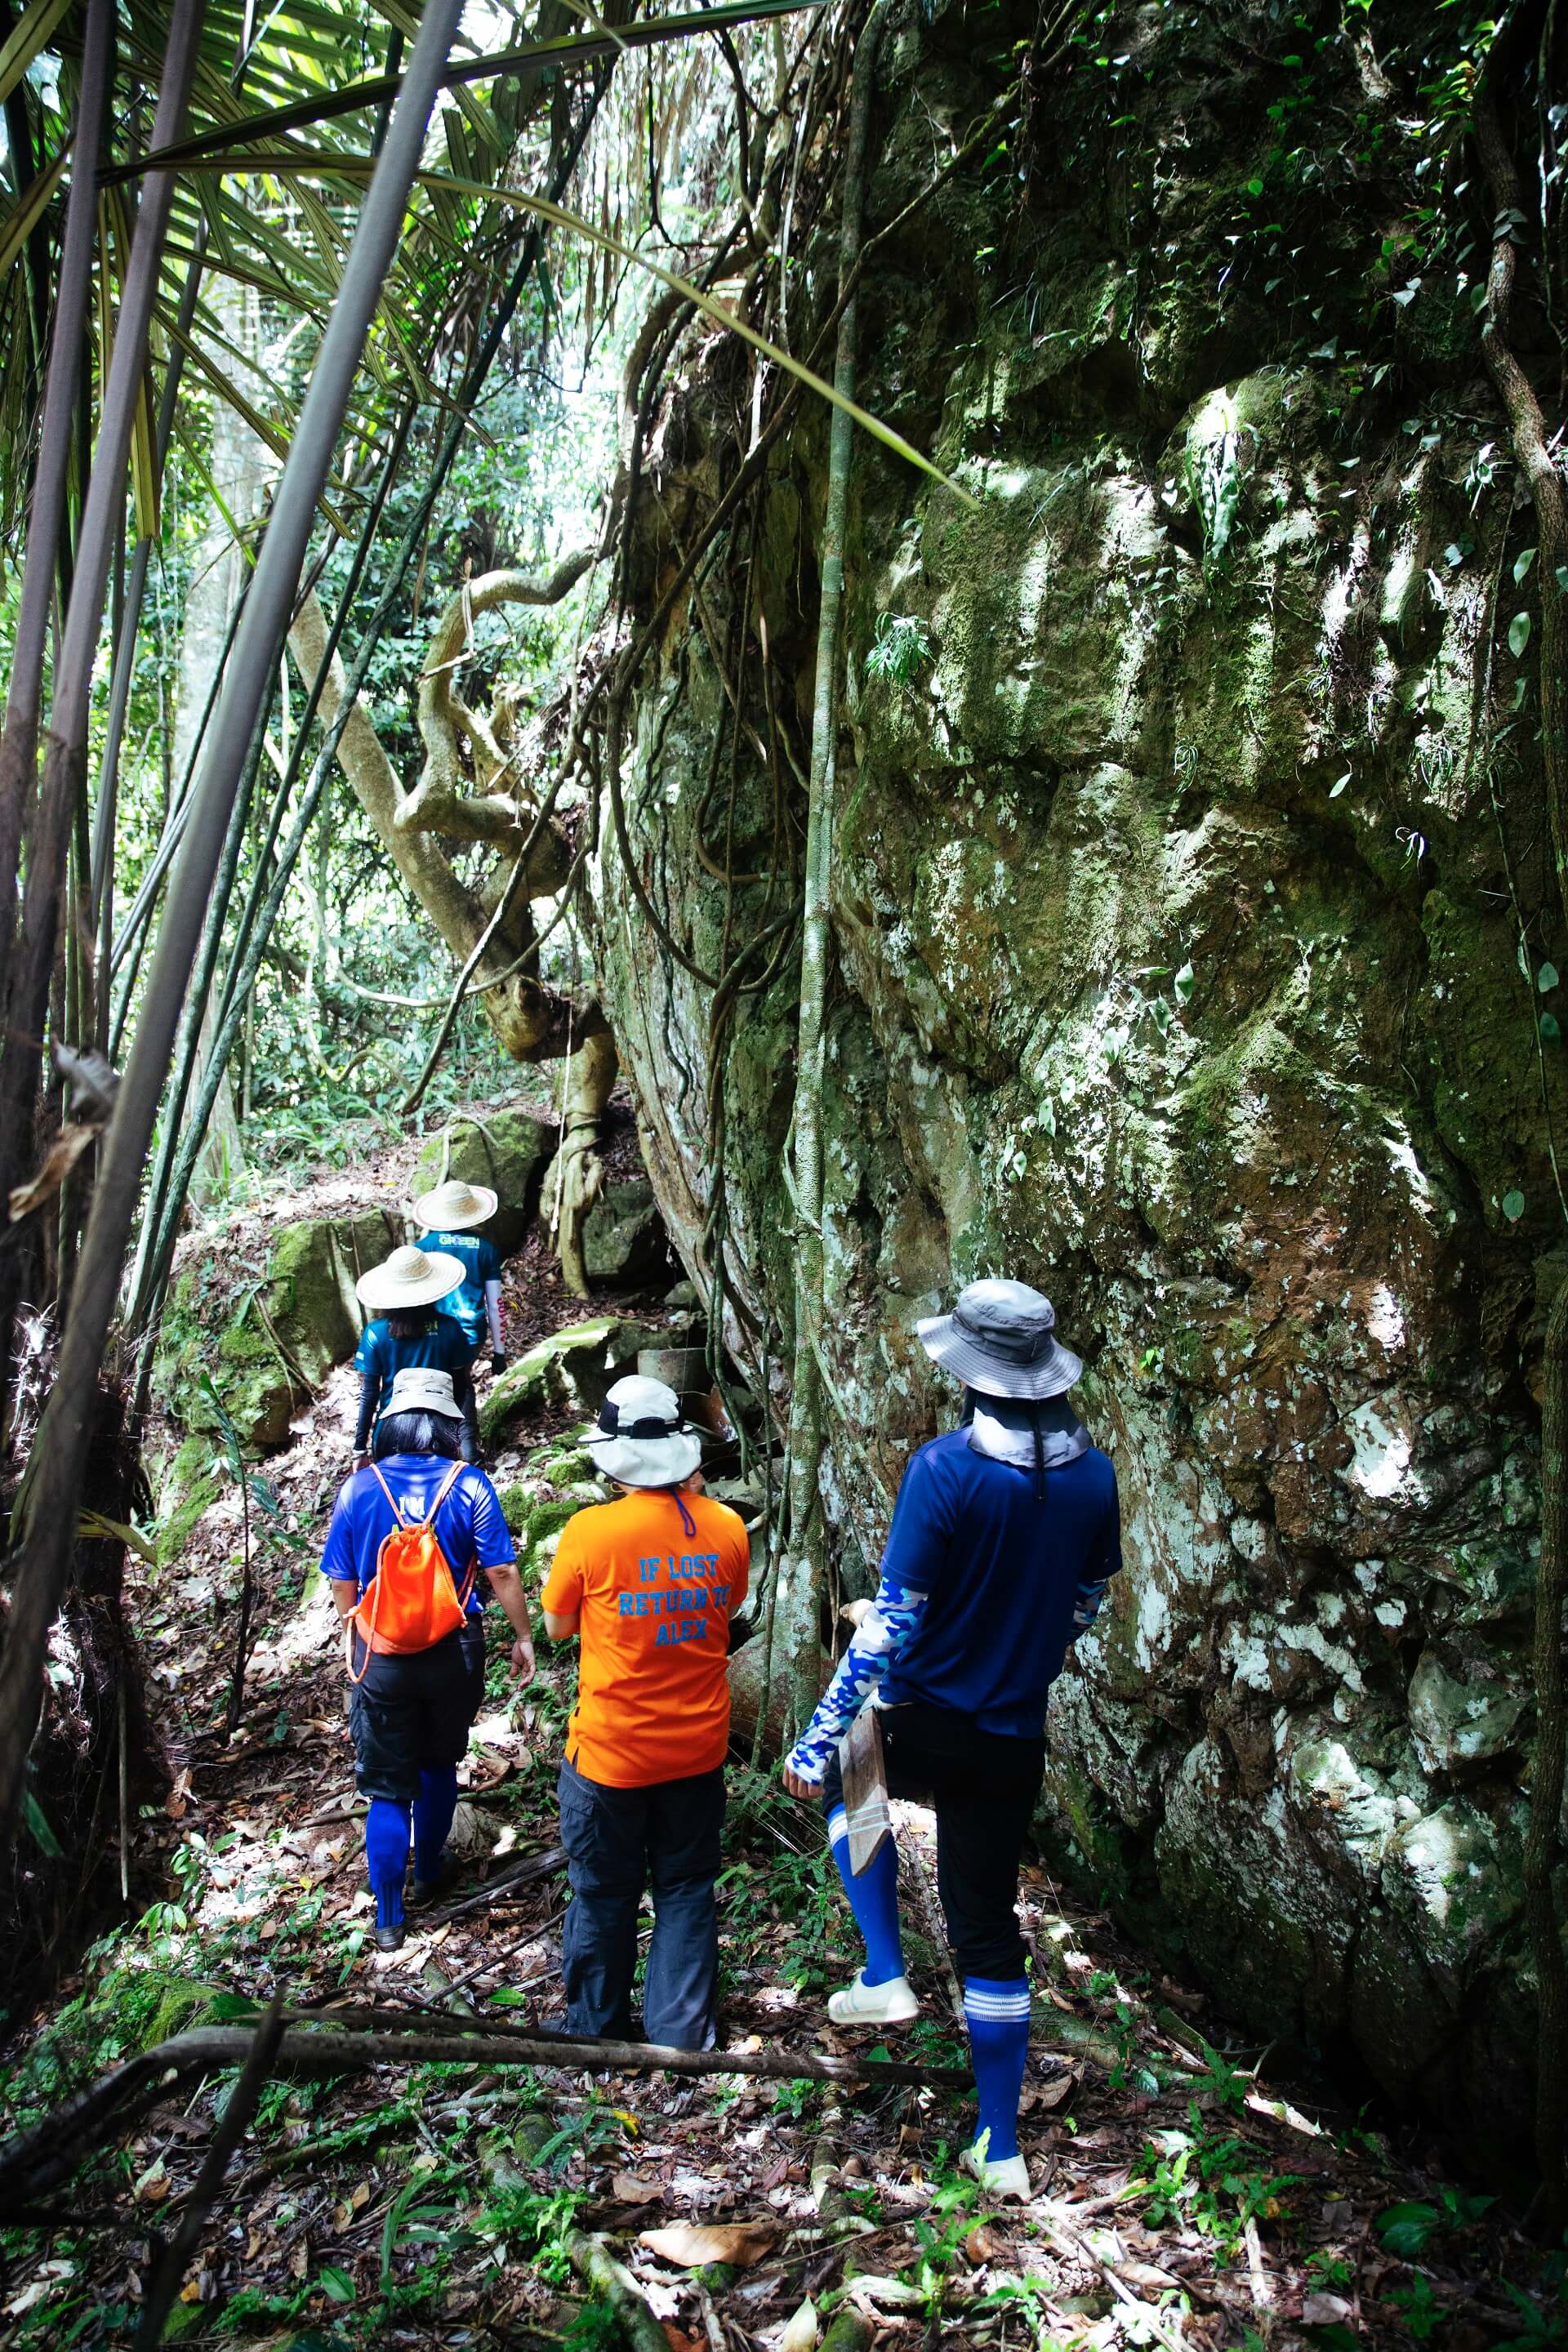 A group of travellers make their way down a trail in a forest. The leisurely village walks take guests to sites revealing some Lun Bawang history, such as a former buaya tanah (crocodile mound), where Lun Bawang warriors celebrated for seven days and nights after successful headhunting expeditions.